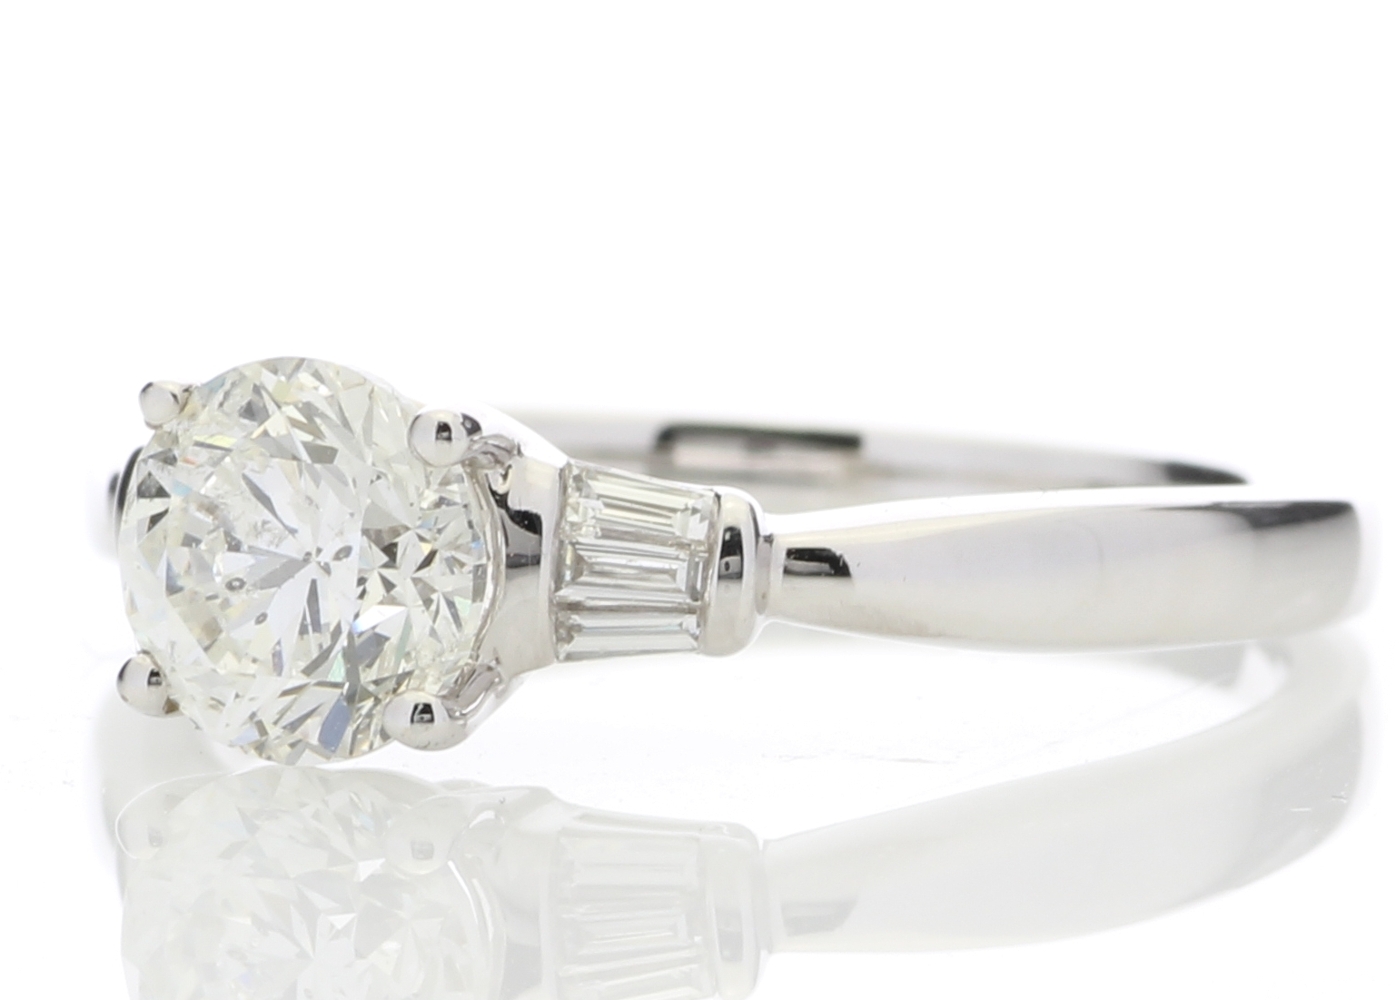 18ct White Gold Diamond Ring With Baguette 1.15 Carats - Image 2 of 5